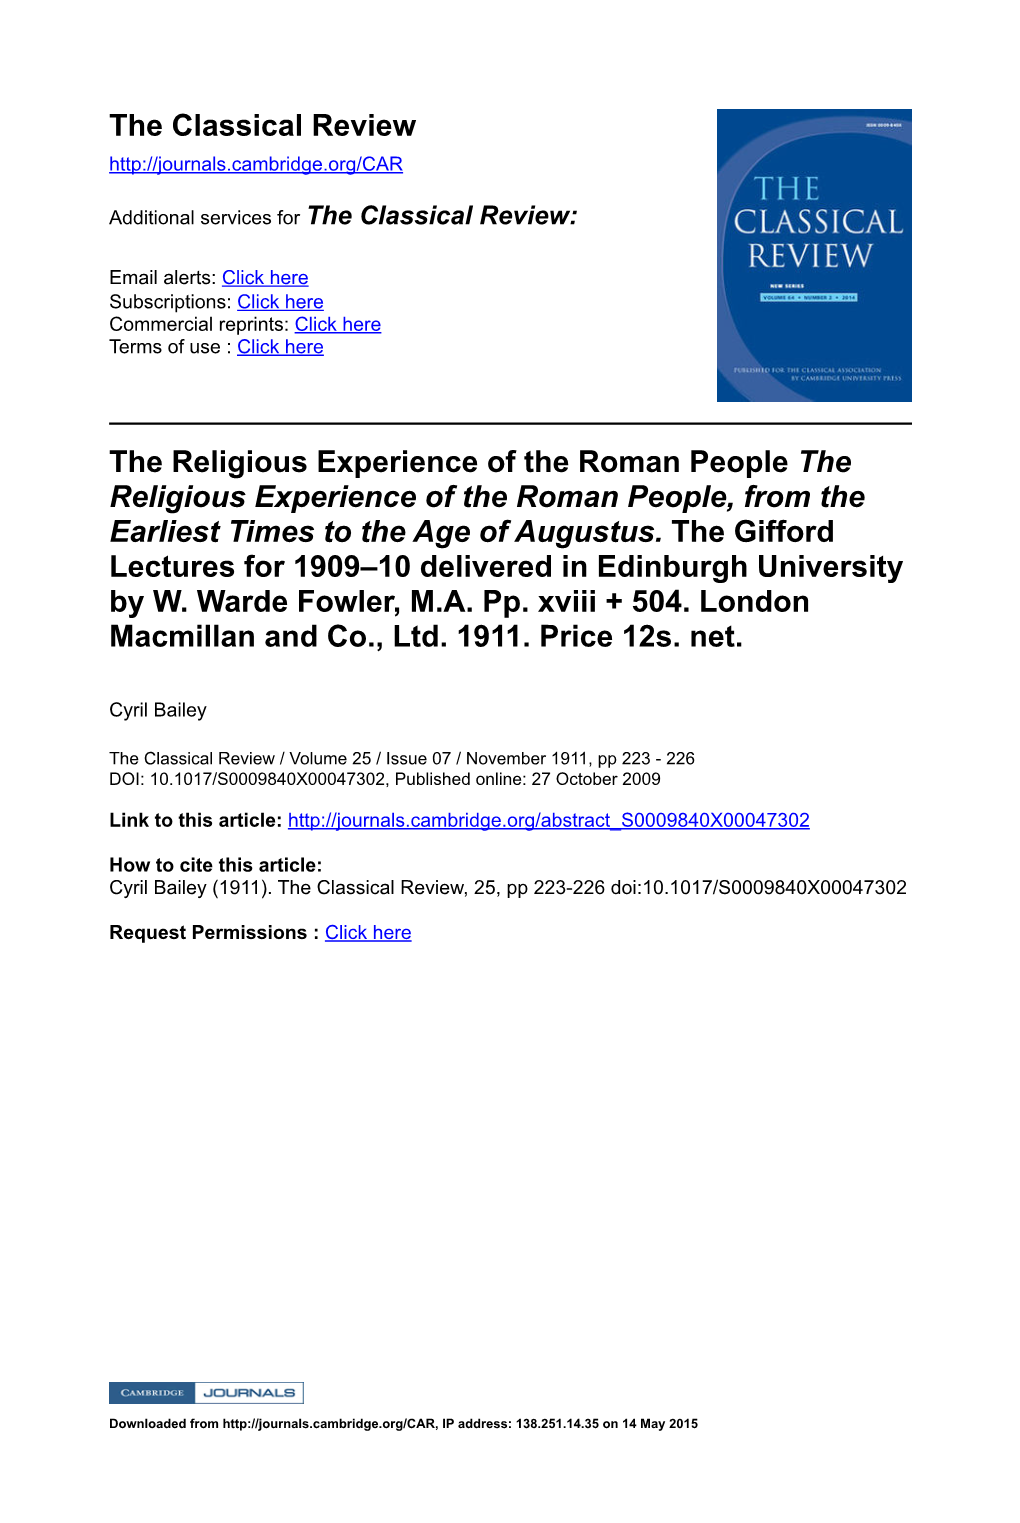 The Religious Experience of the Roman People the Religious Experience of the Roman People, from the Earliest Times to the Age of Augustus